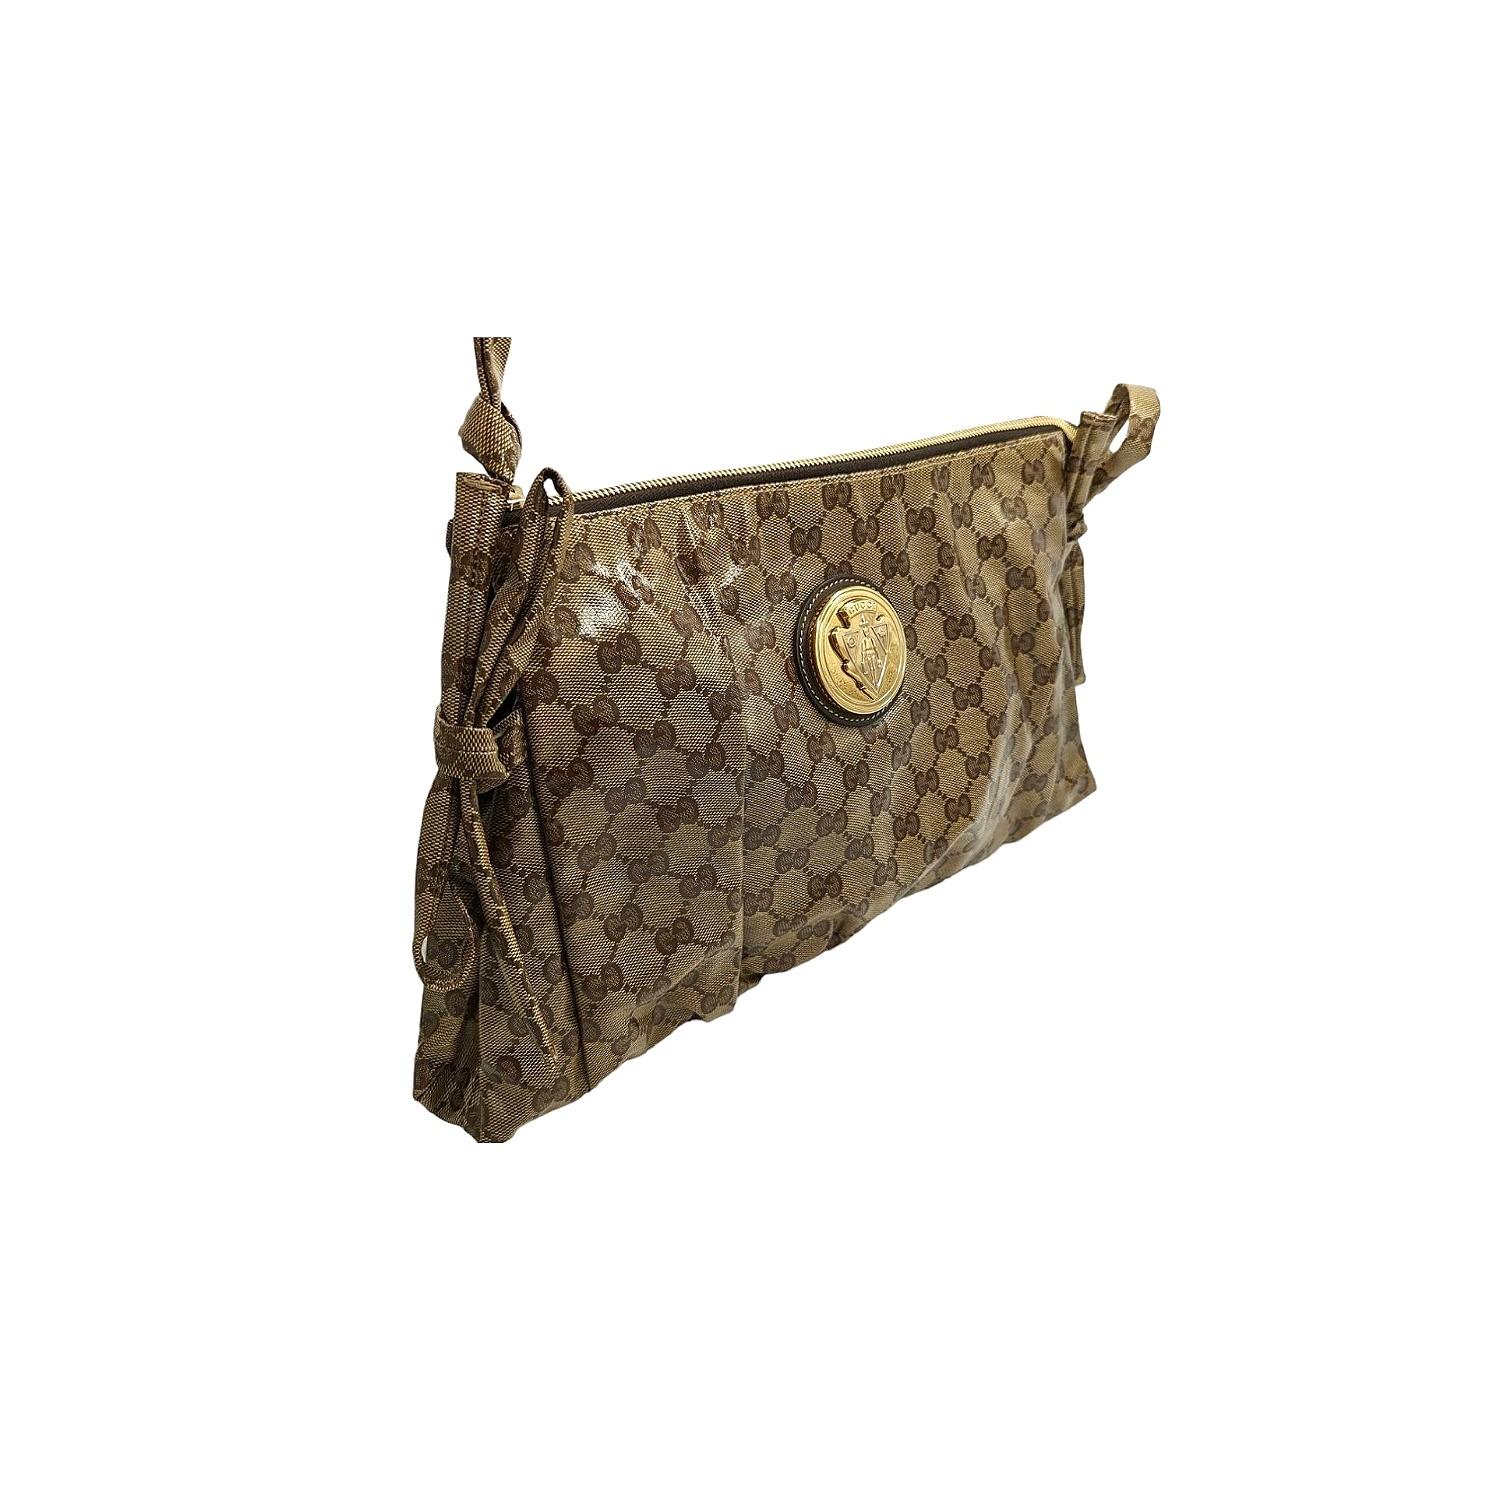 Gucci Beige/Ebony GG Crystal Hysteria Clutch Bag In Excellent Condition For Sale In Scottsdale, AZ